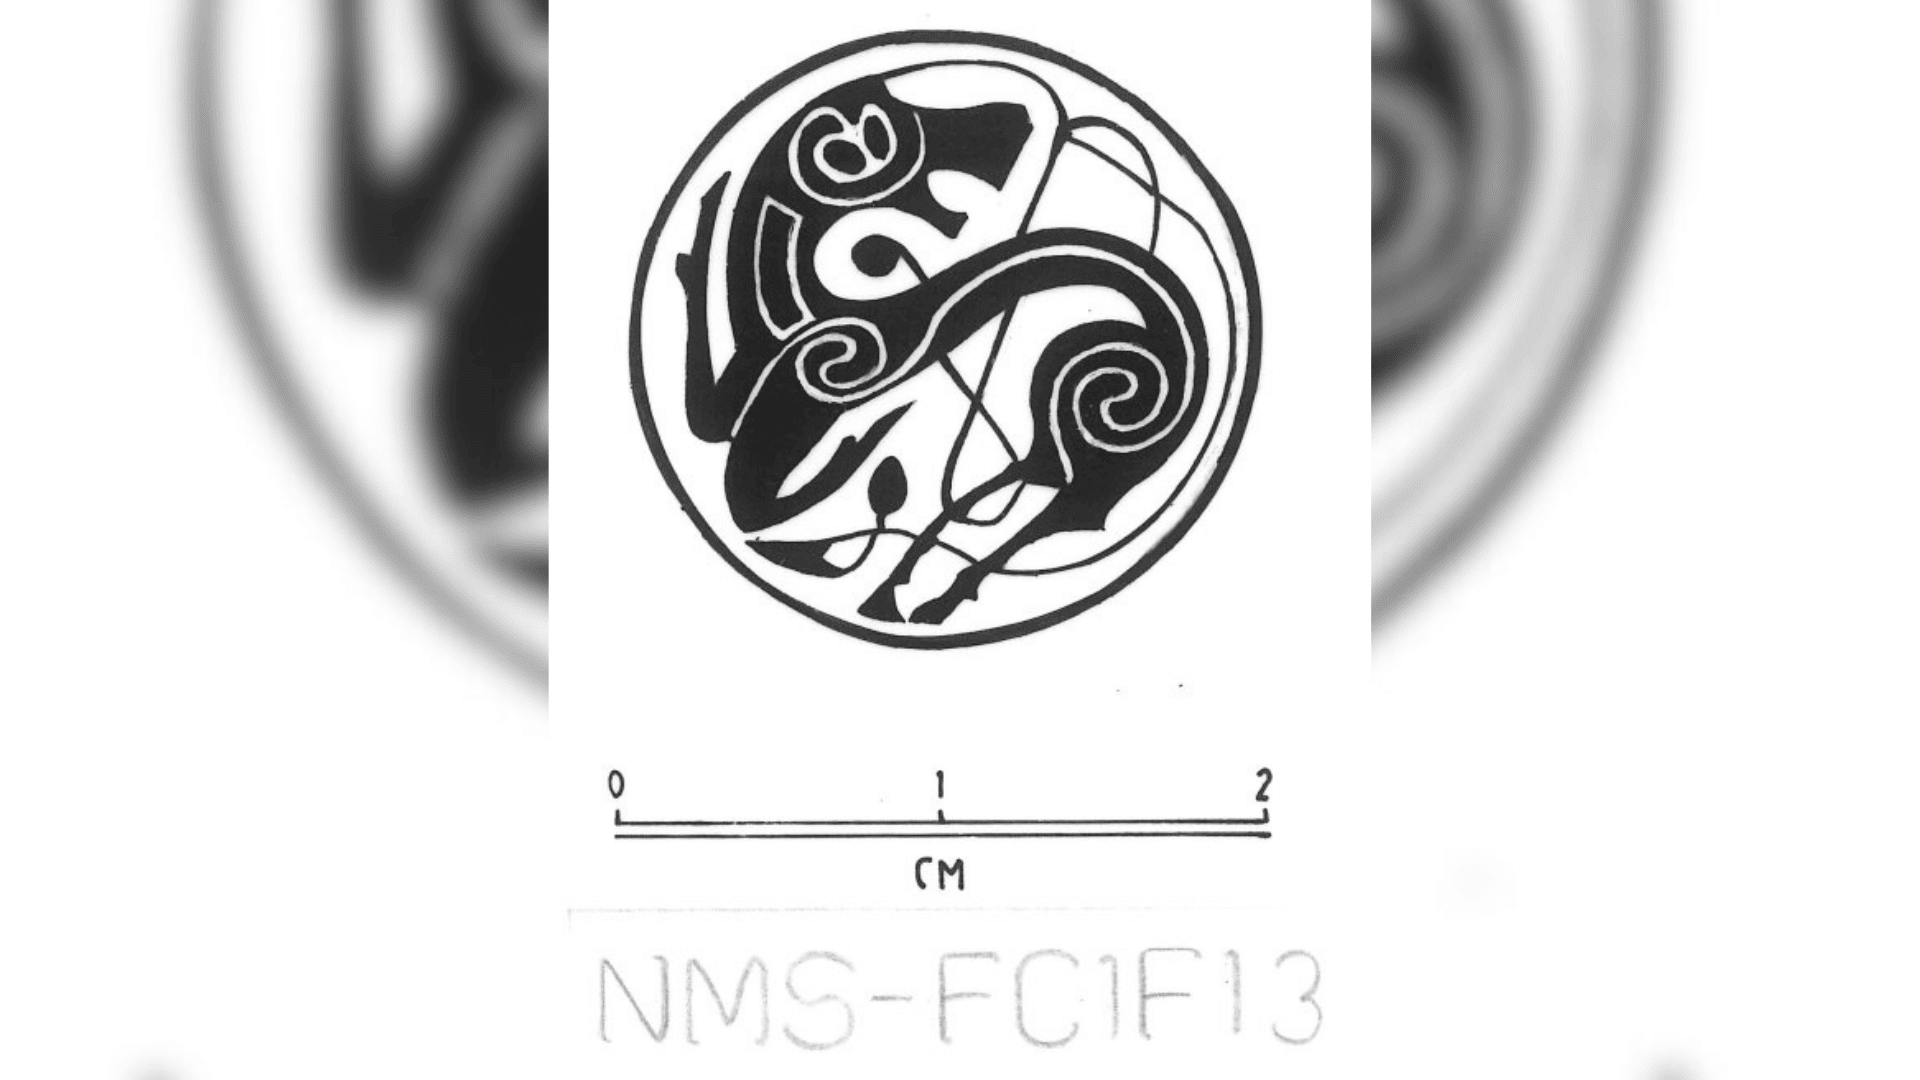 Analytical drawing of the early-medieval unidentified object. Photo: Norfolk County Council.